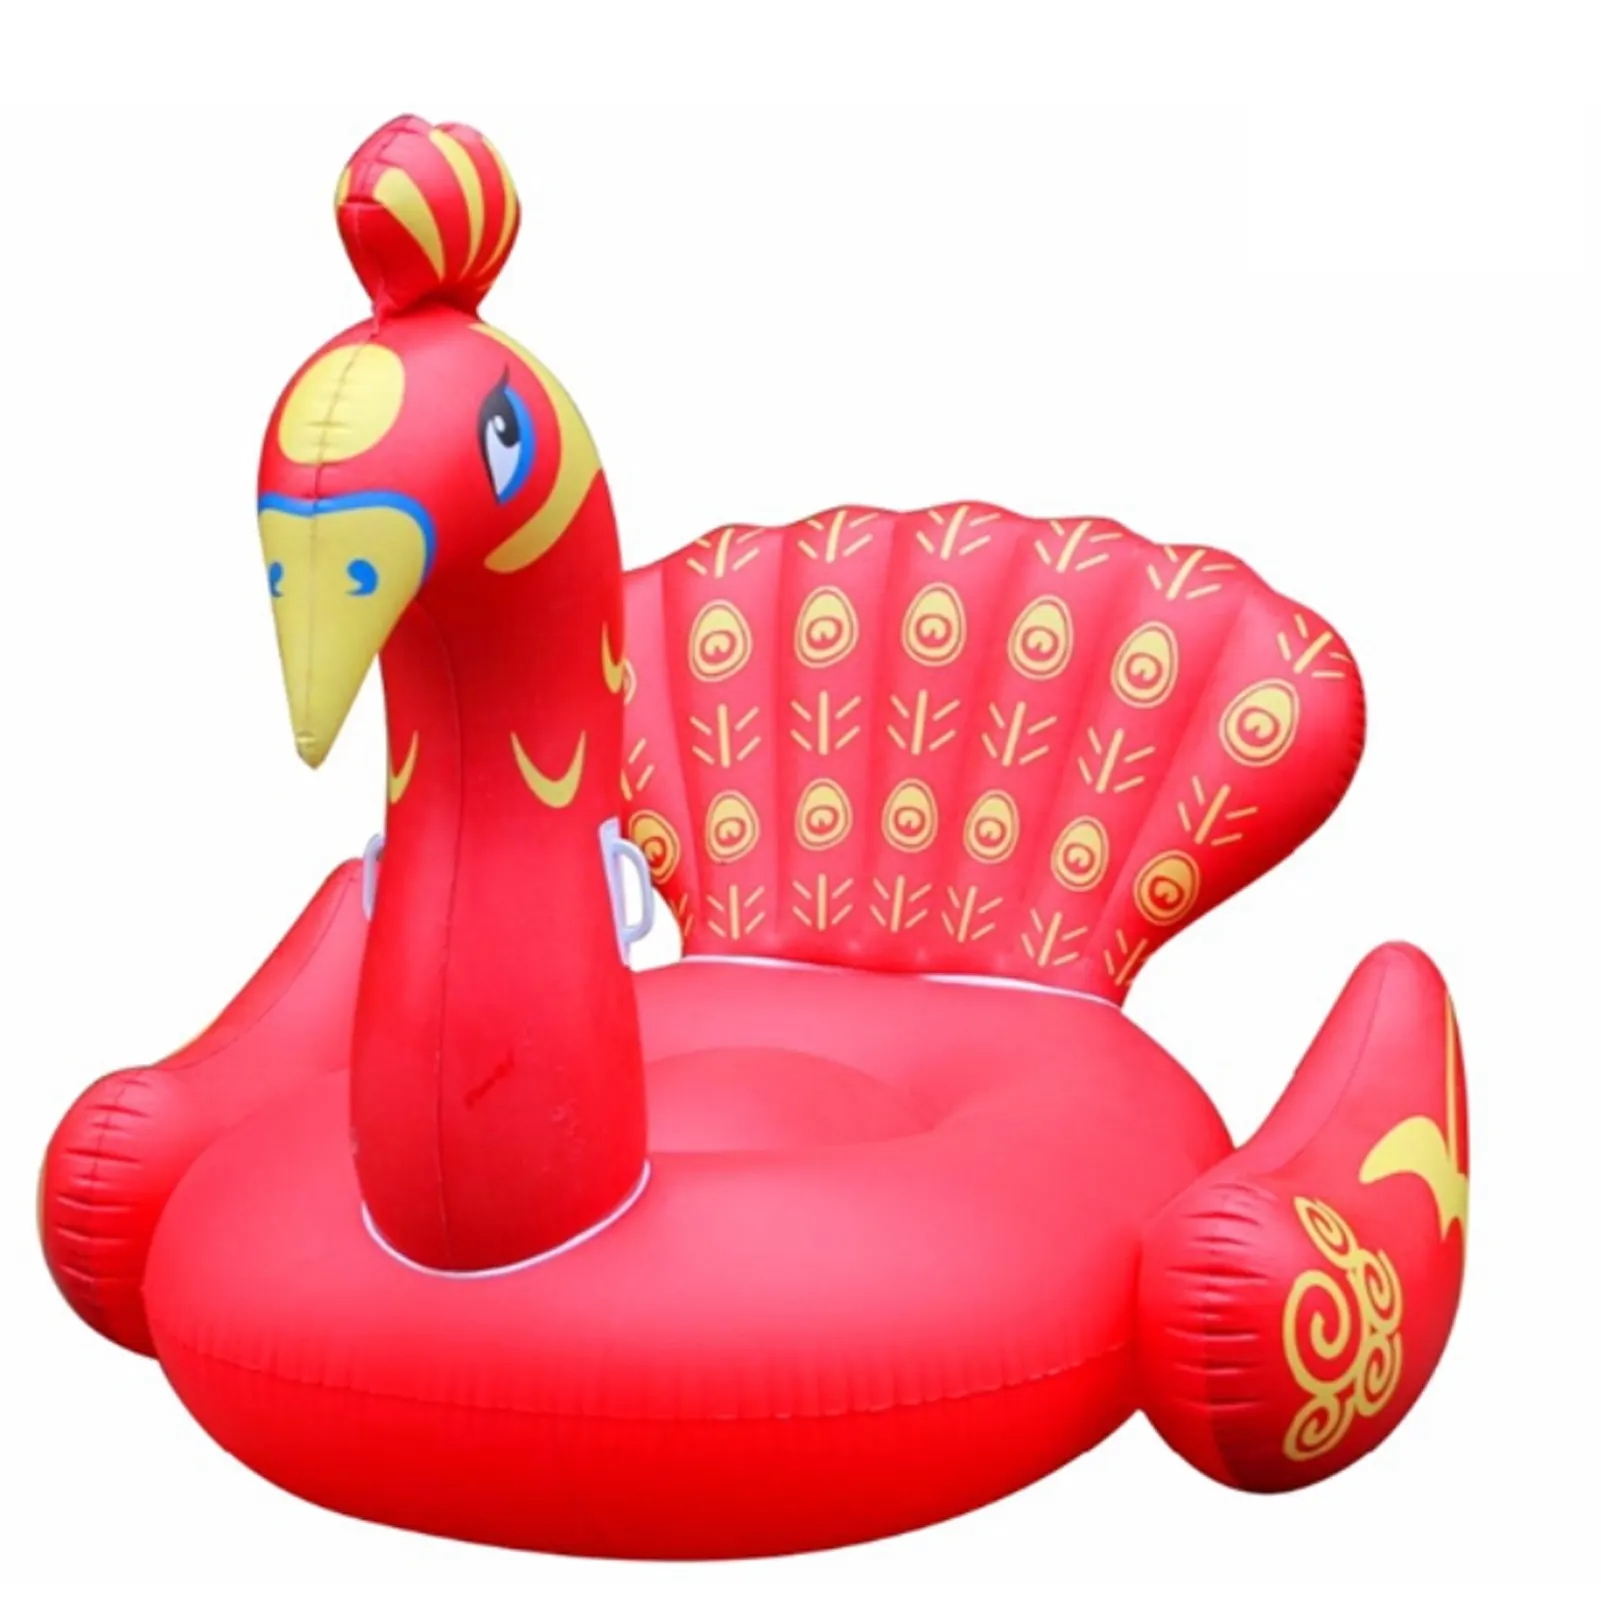 pvc inflatable peacock float / inflatable red peacock float for adult / inflatable red peafowl float